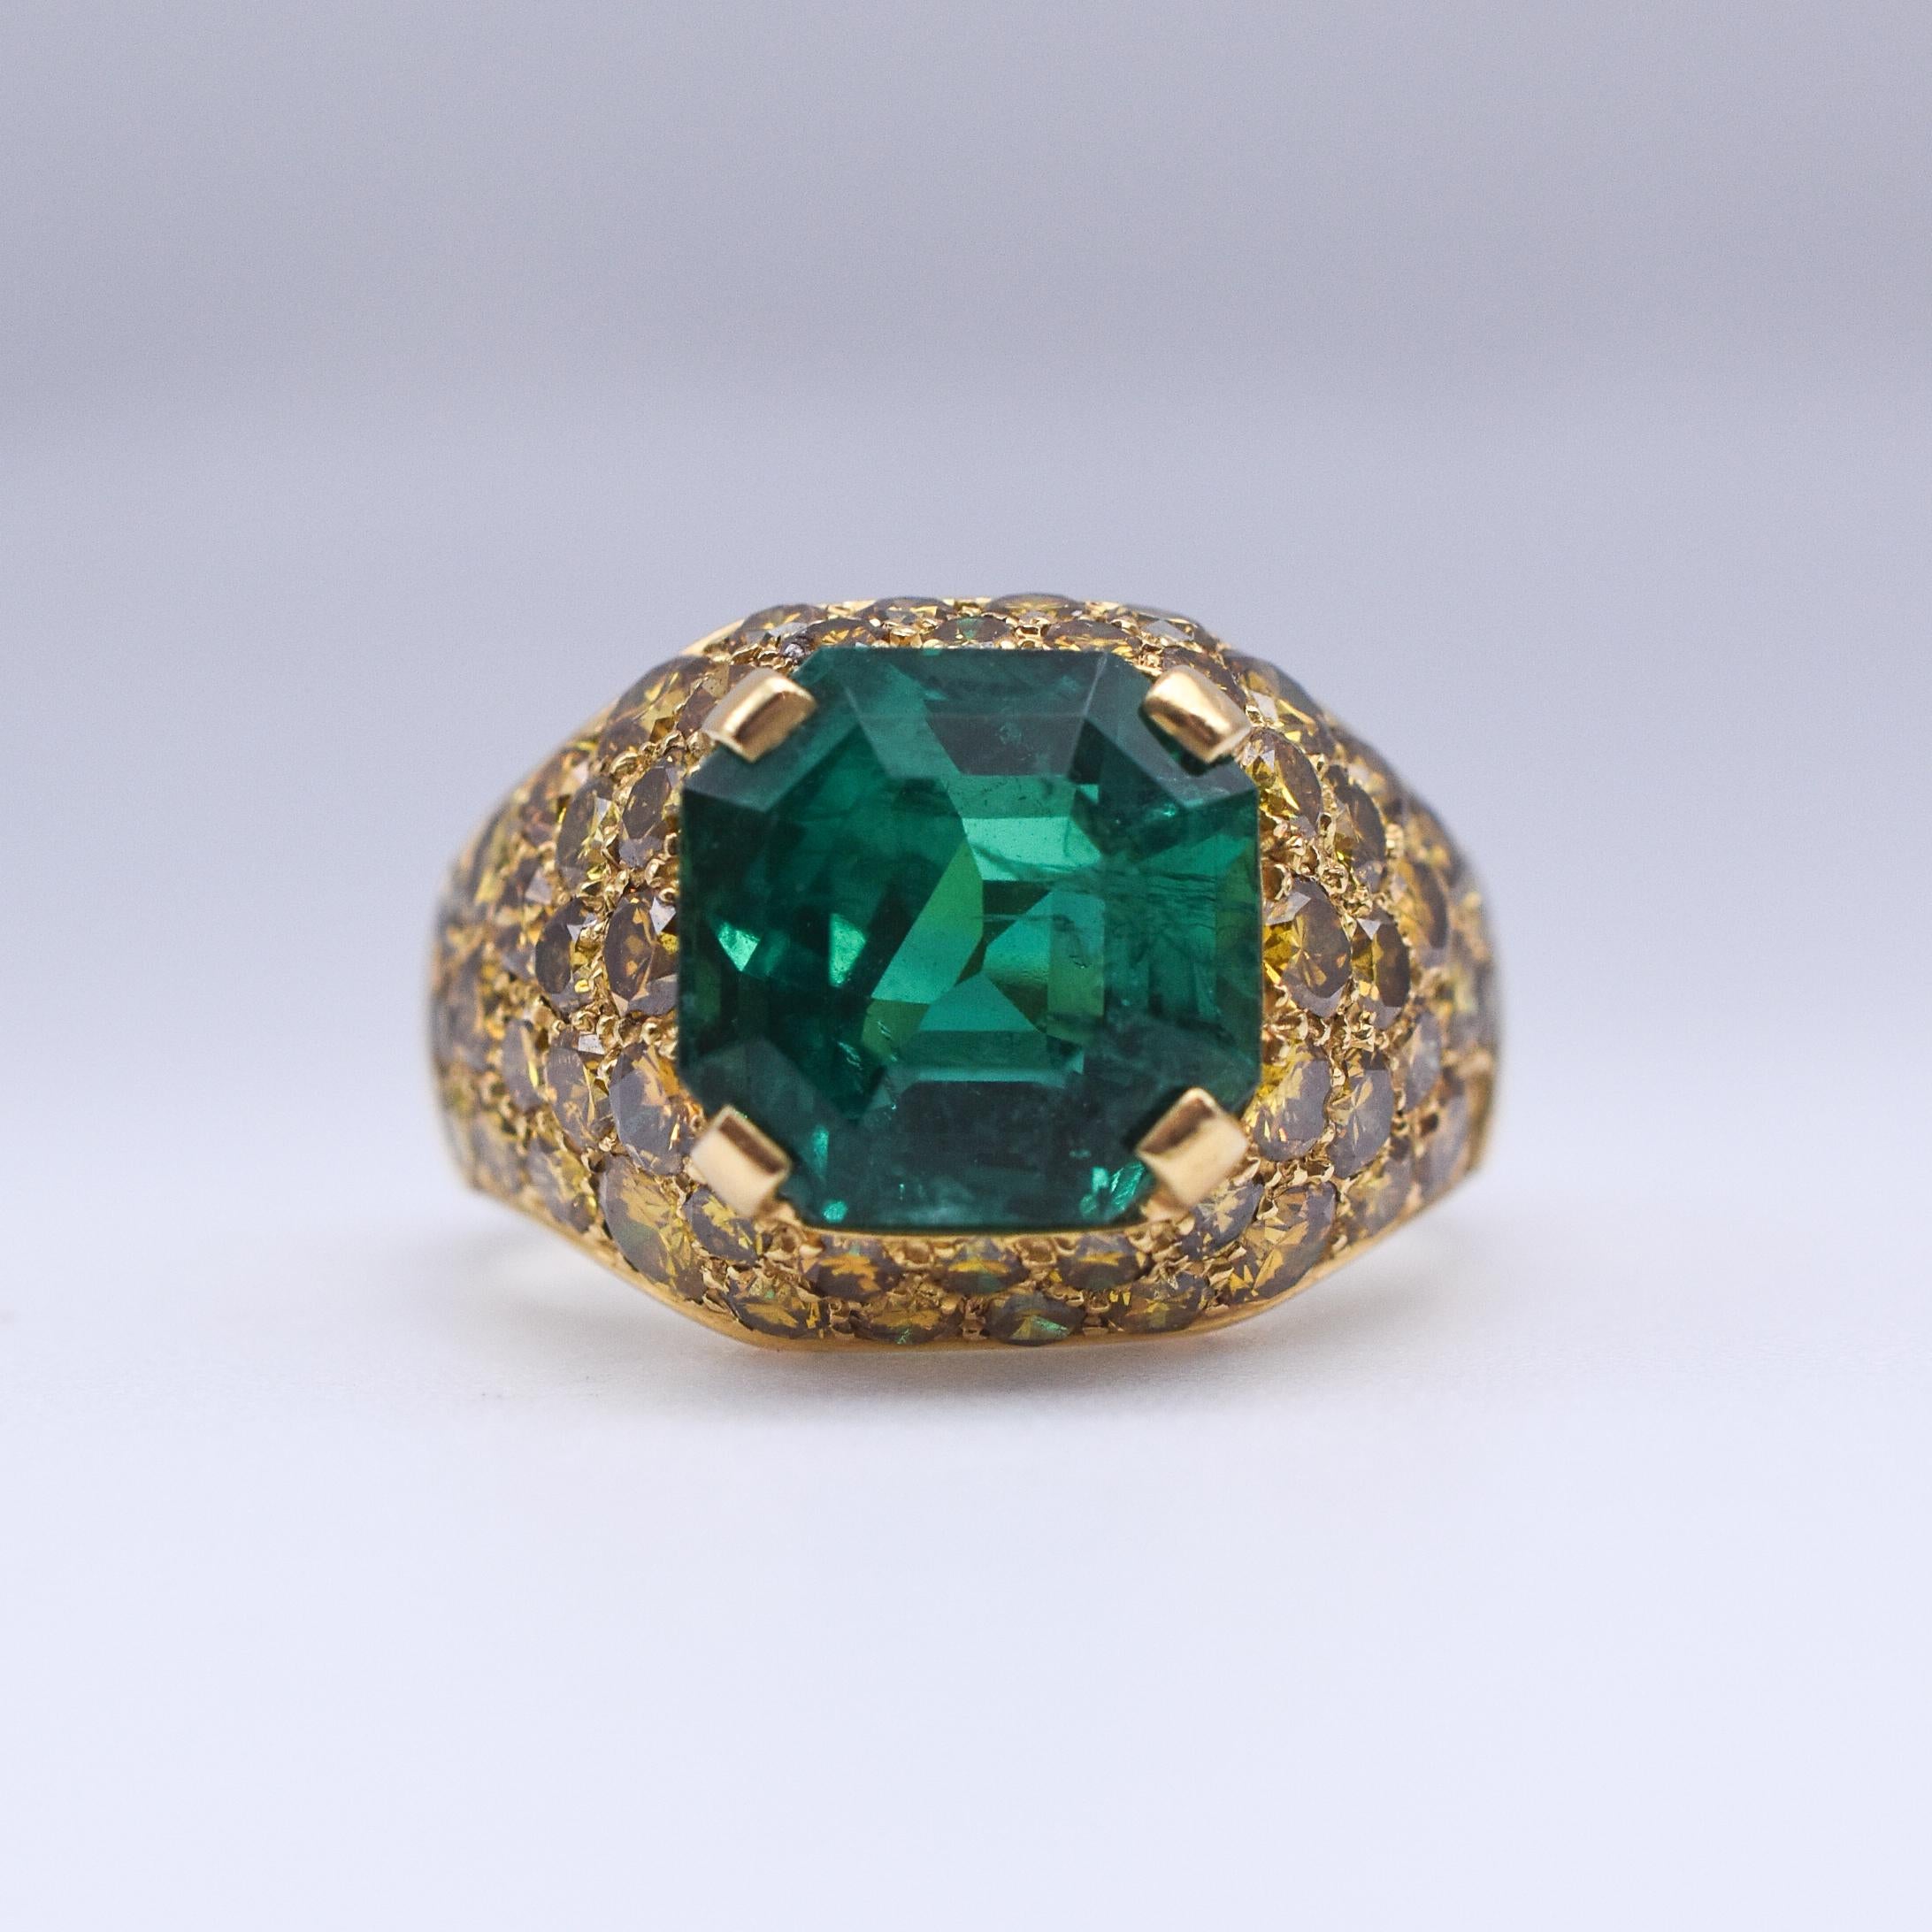 A sumptuous Emerald and Diamond Cocktail Ring, showcasing a splendid 4.70ct Colombian Emerald with moderate resin mounted on 18k Yellow Gold and further embellished with Fancy Yellow Diamonds. The ring is accompanied by a IGN certificate.